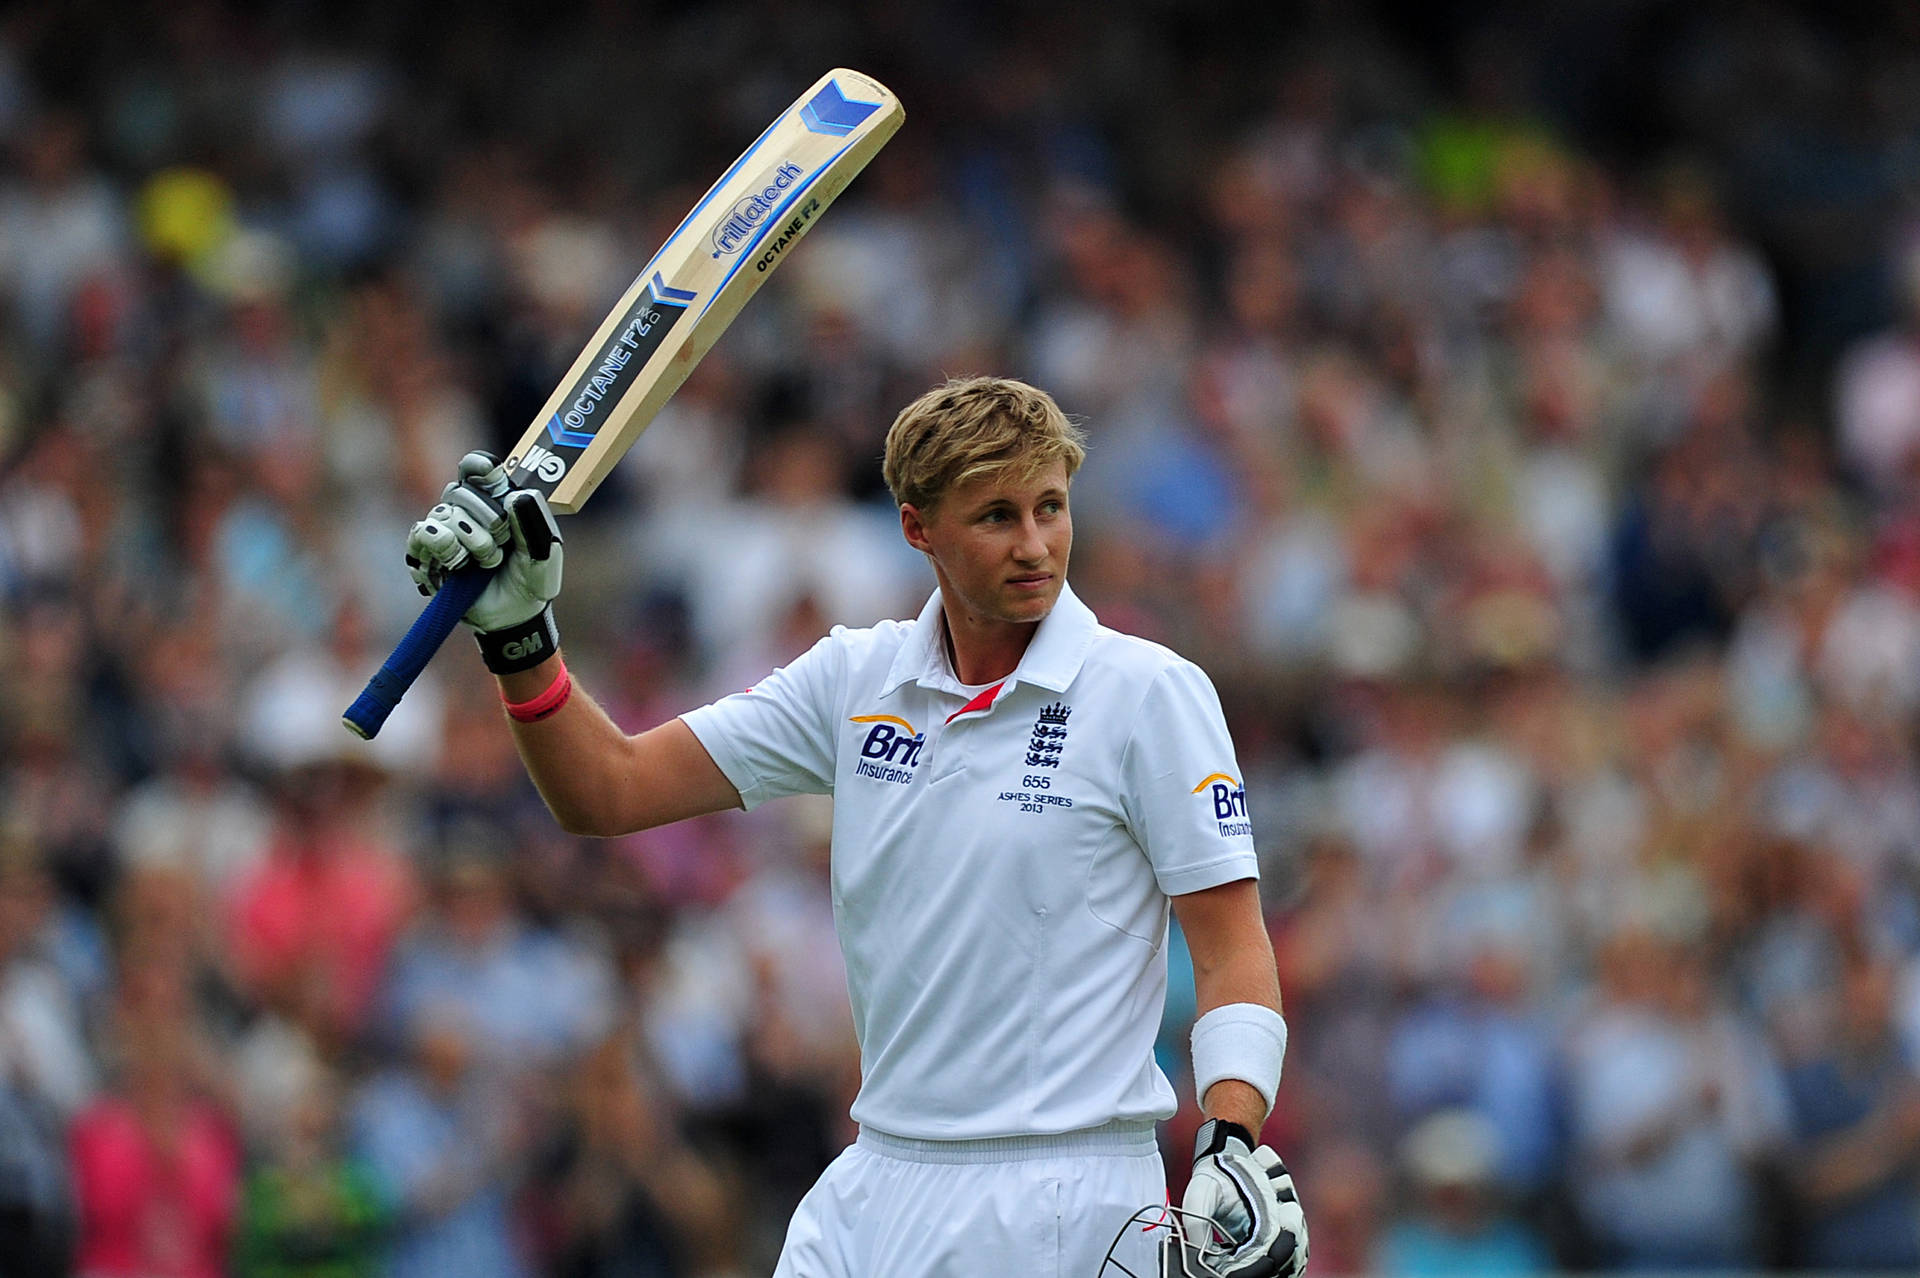 A Focused Joe Root During A Cricket Match